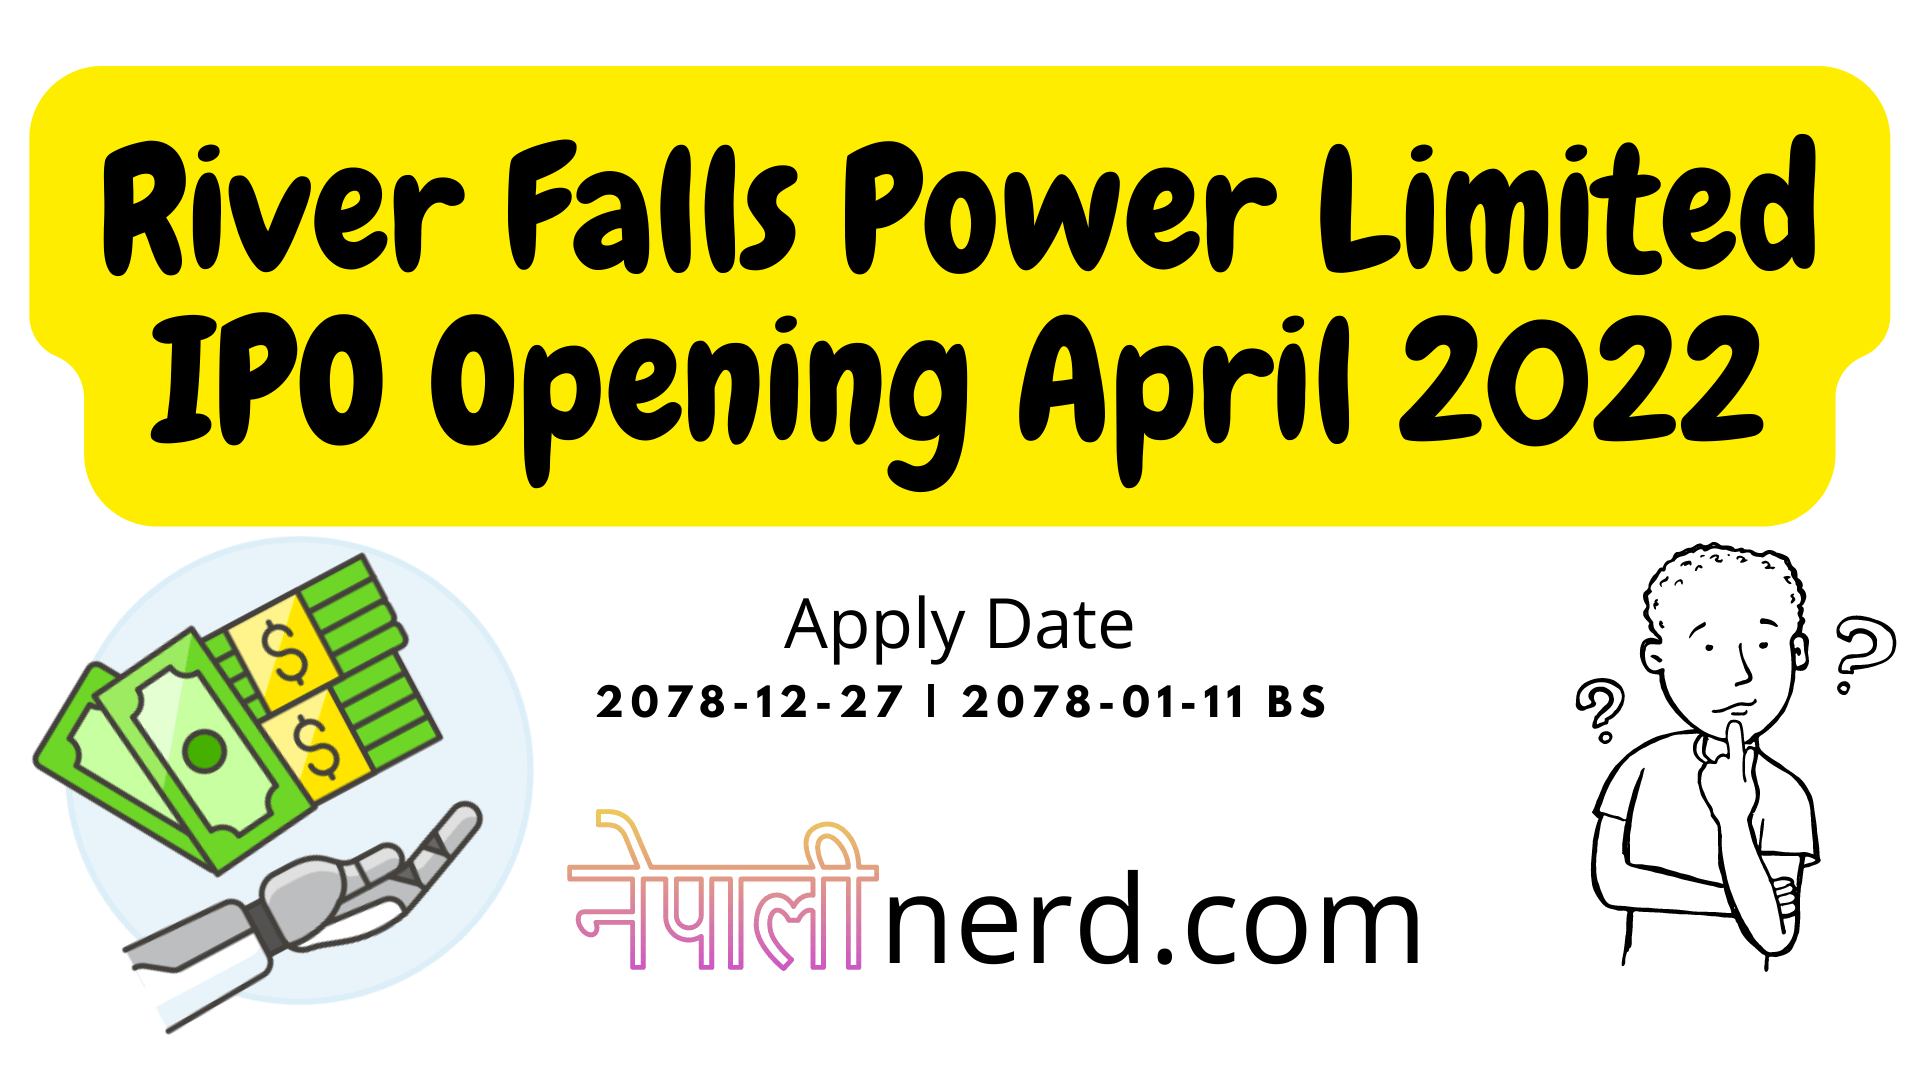 River Falls Power Limited IPO Opening Details nepalinerd.com